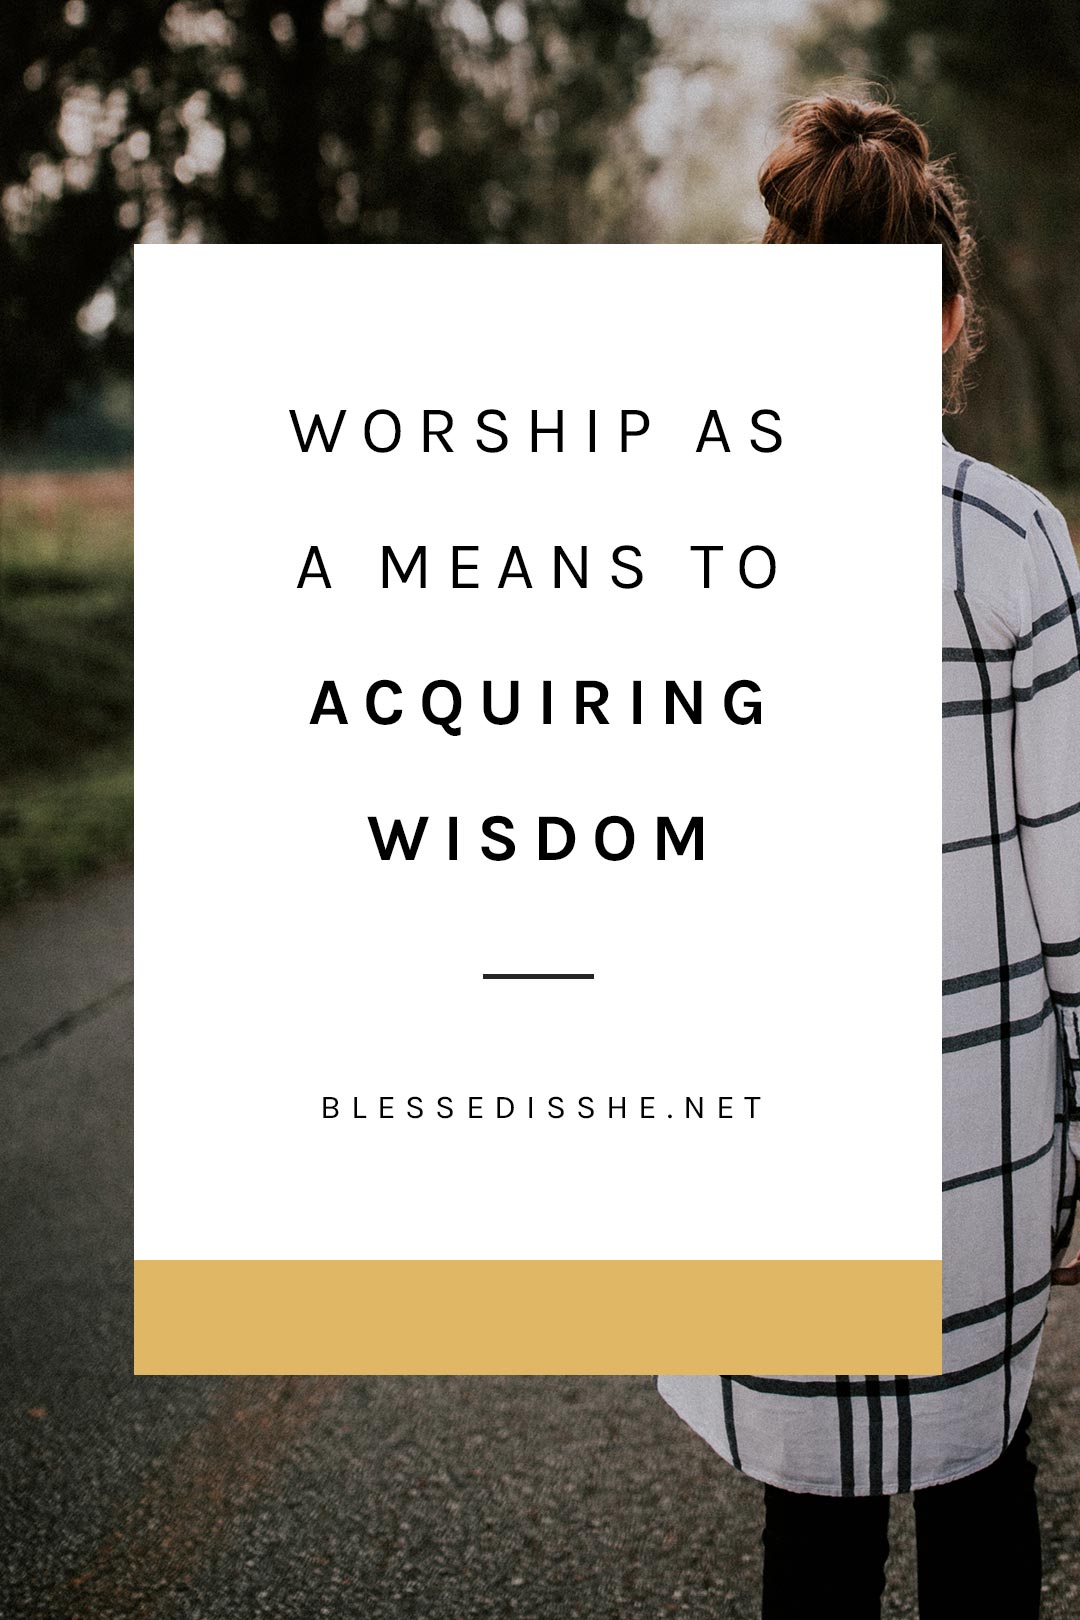 how worshipping god leads us to wisdom